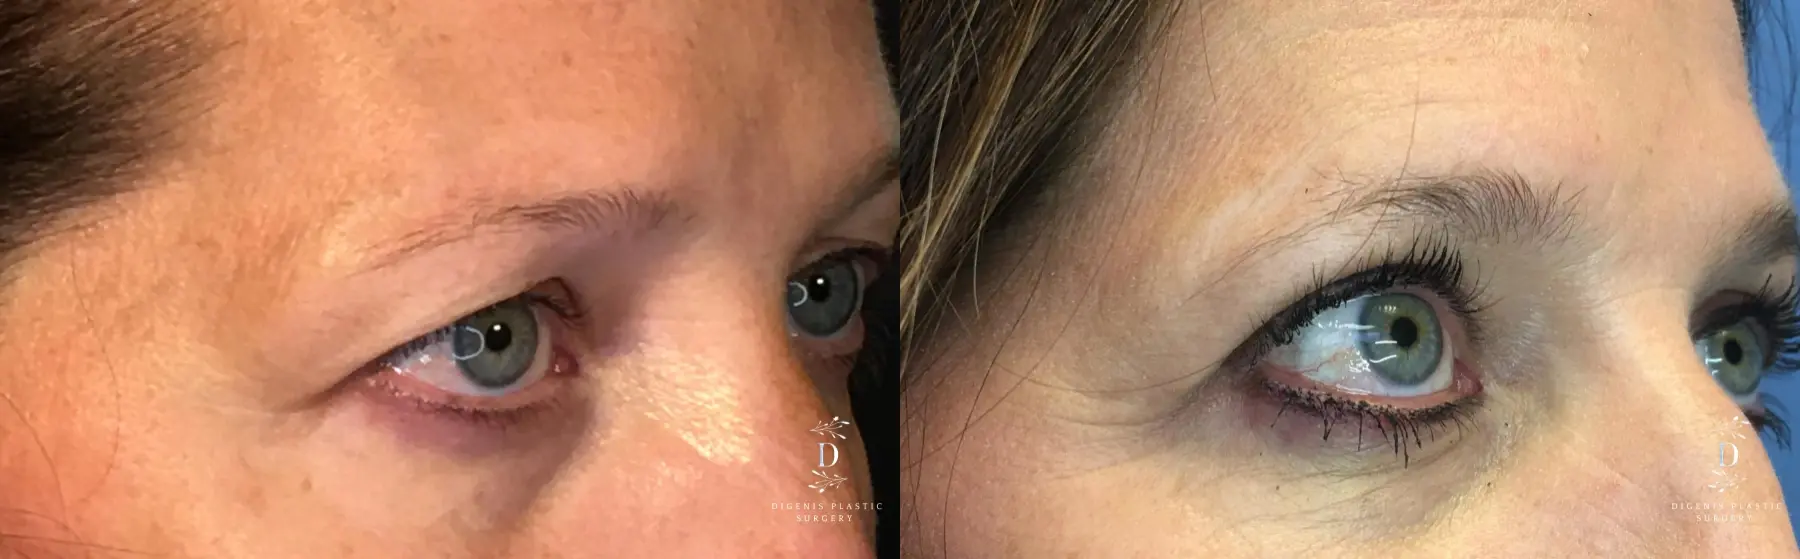 Eyelid Surgery: Patient 17 - Before and After 2